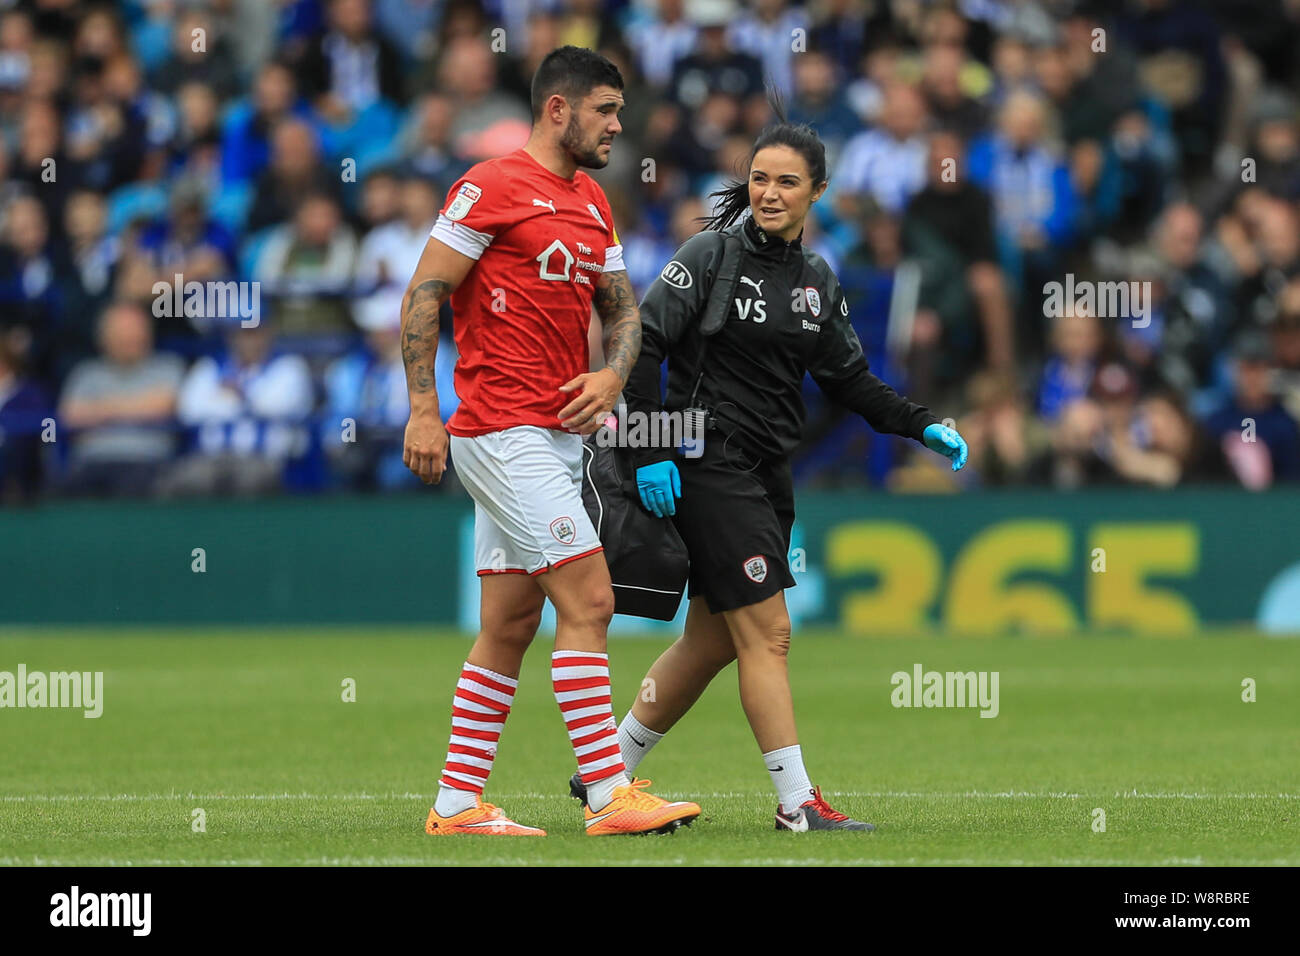 10th August 2019 , Hillsborough, Sheffield, England; Sky Bet Championship, Sheffield Wednesday vs Barnsley : Alex Mowatt (27) of Barnsley is substituted through injury  Credit: Mark Cosgrove/News Images,  English Football League images are subject to DataCo Licence Stock Photo